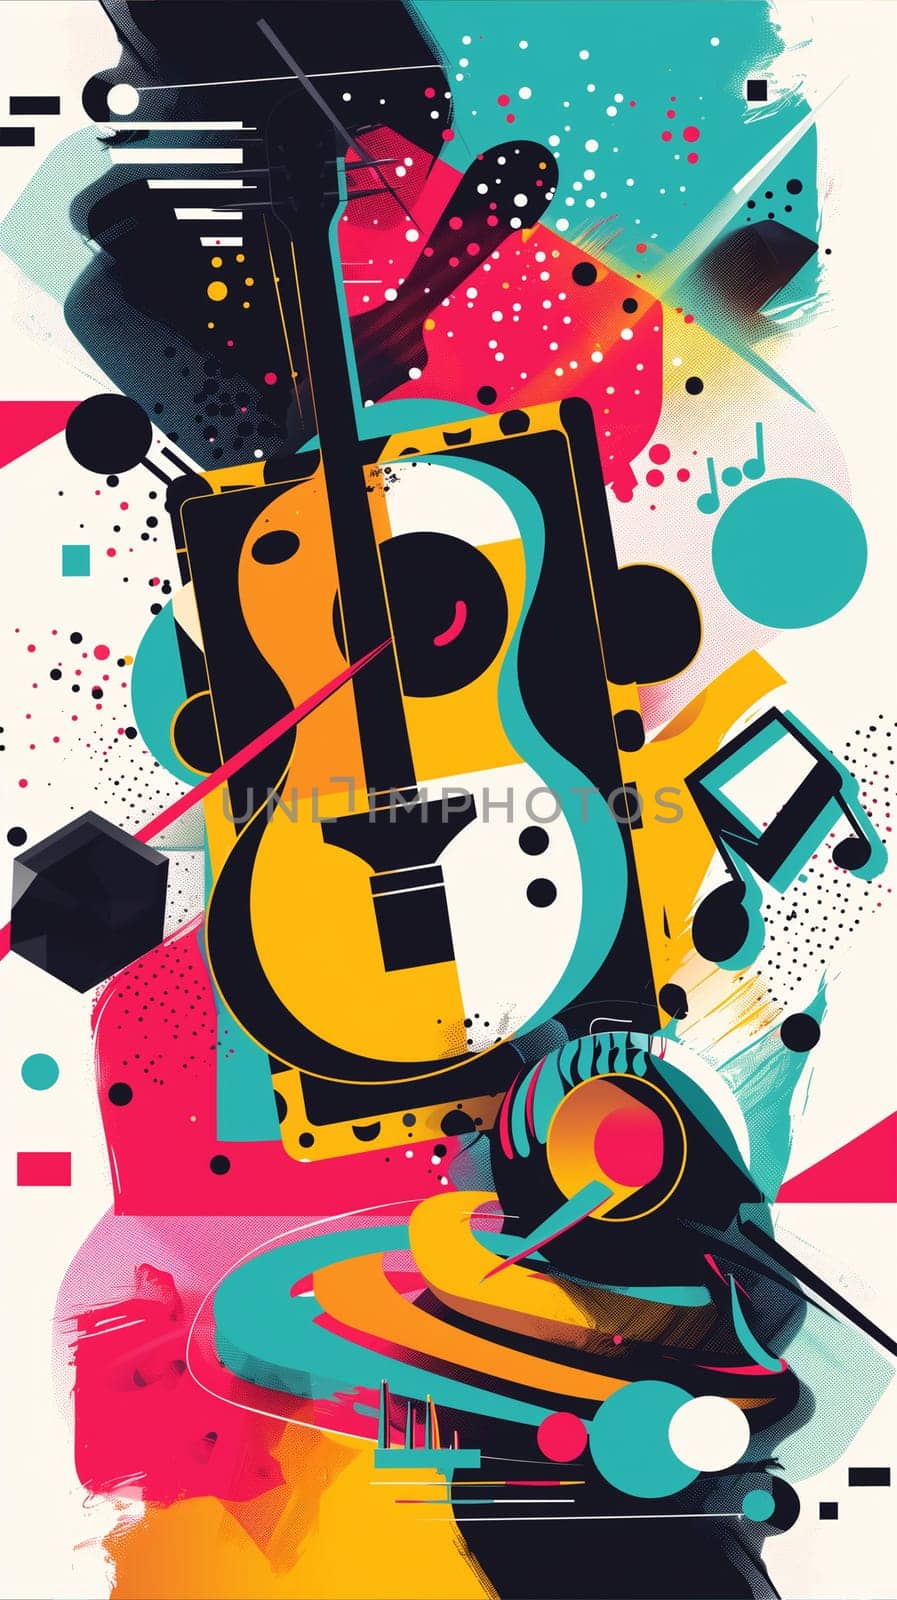 An abstract painting featuring a guitar surrounded by music notes. The artwork evokes a sense of rhythm and melody through its colorful and dynamic composition.